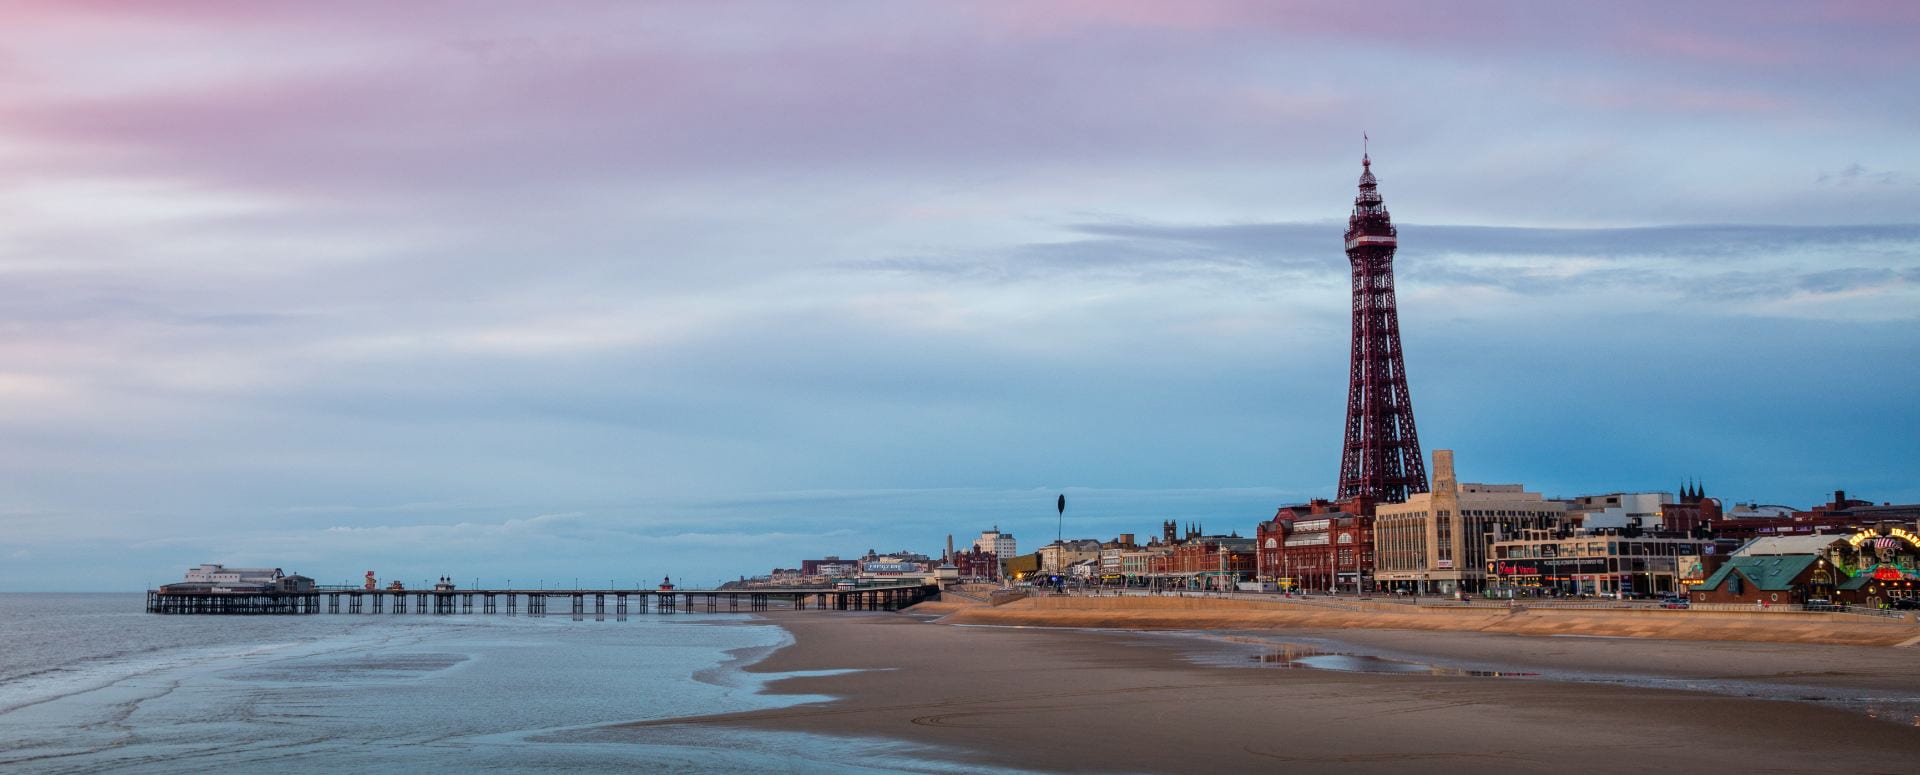 Blackpool seafront with tower and pier